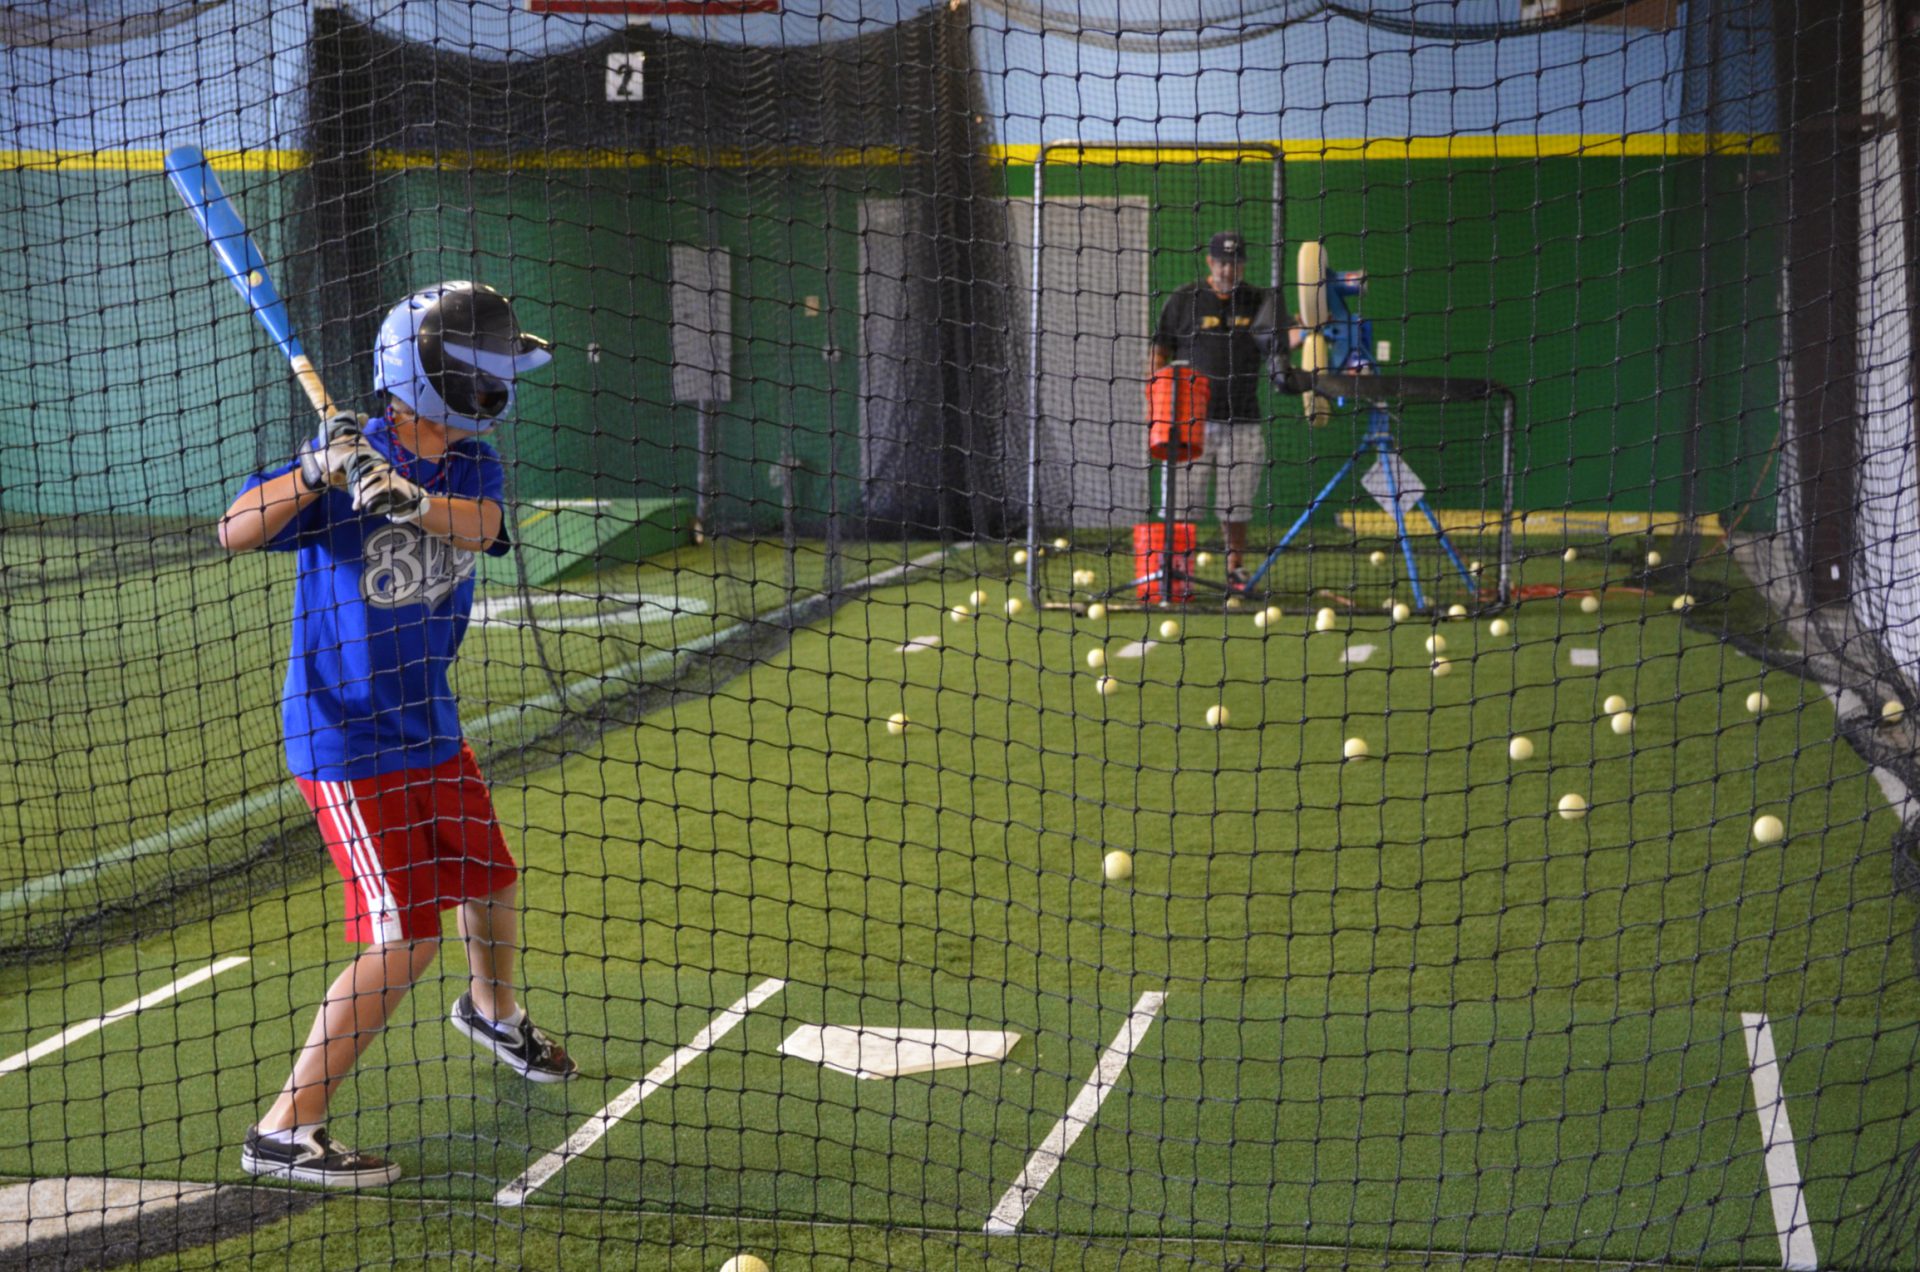 Sports Centre Gets New Batting Cage